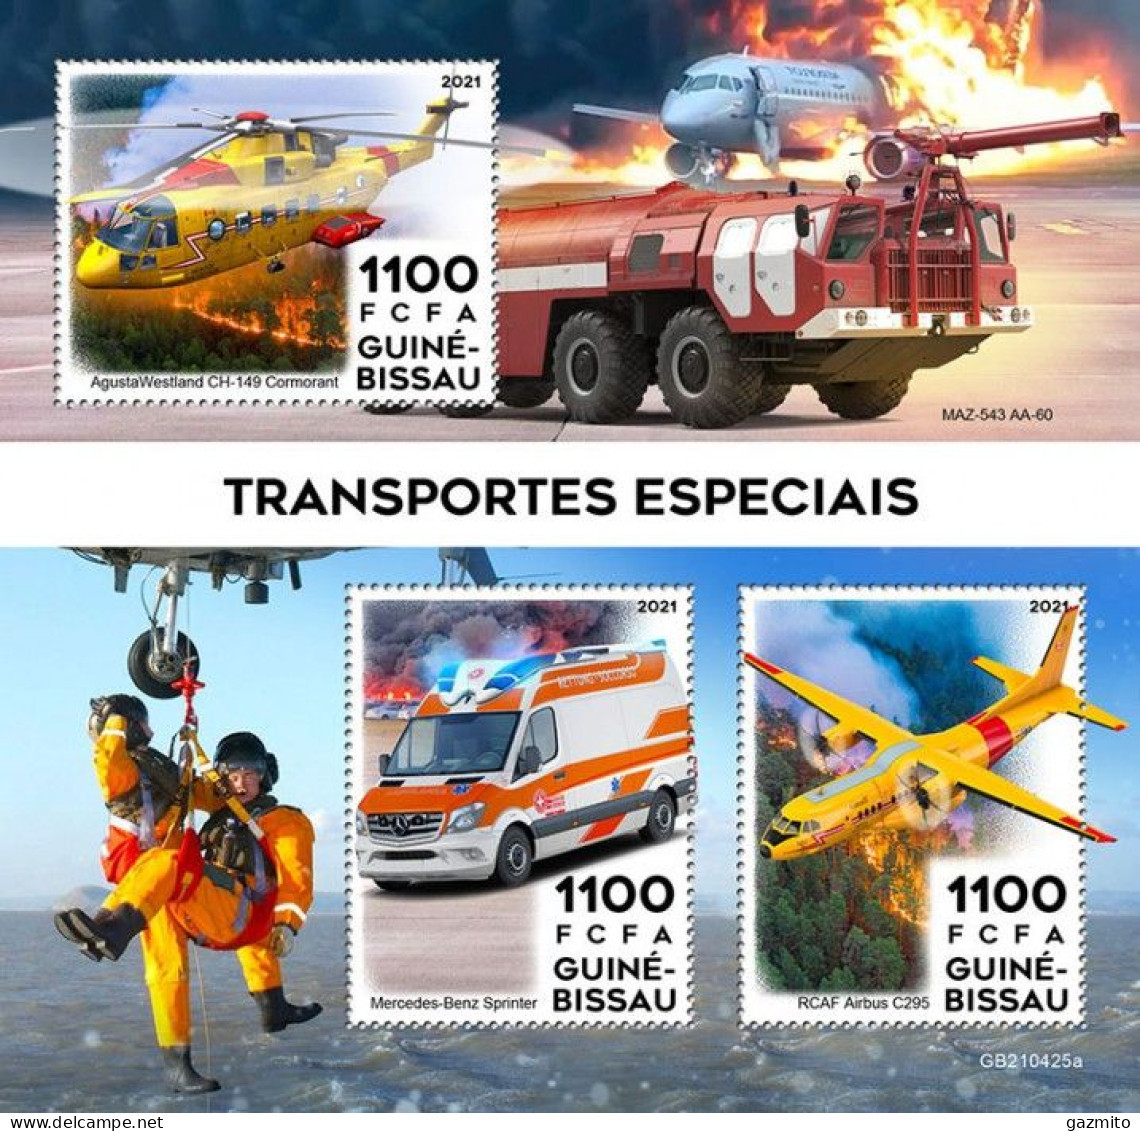 Guinea Bissau 2021, Transport, Helicopter, Plane, Fire Engine, Ambulance, 3val In BF - Bombero